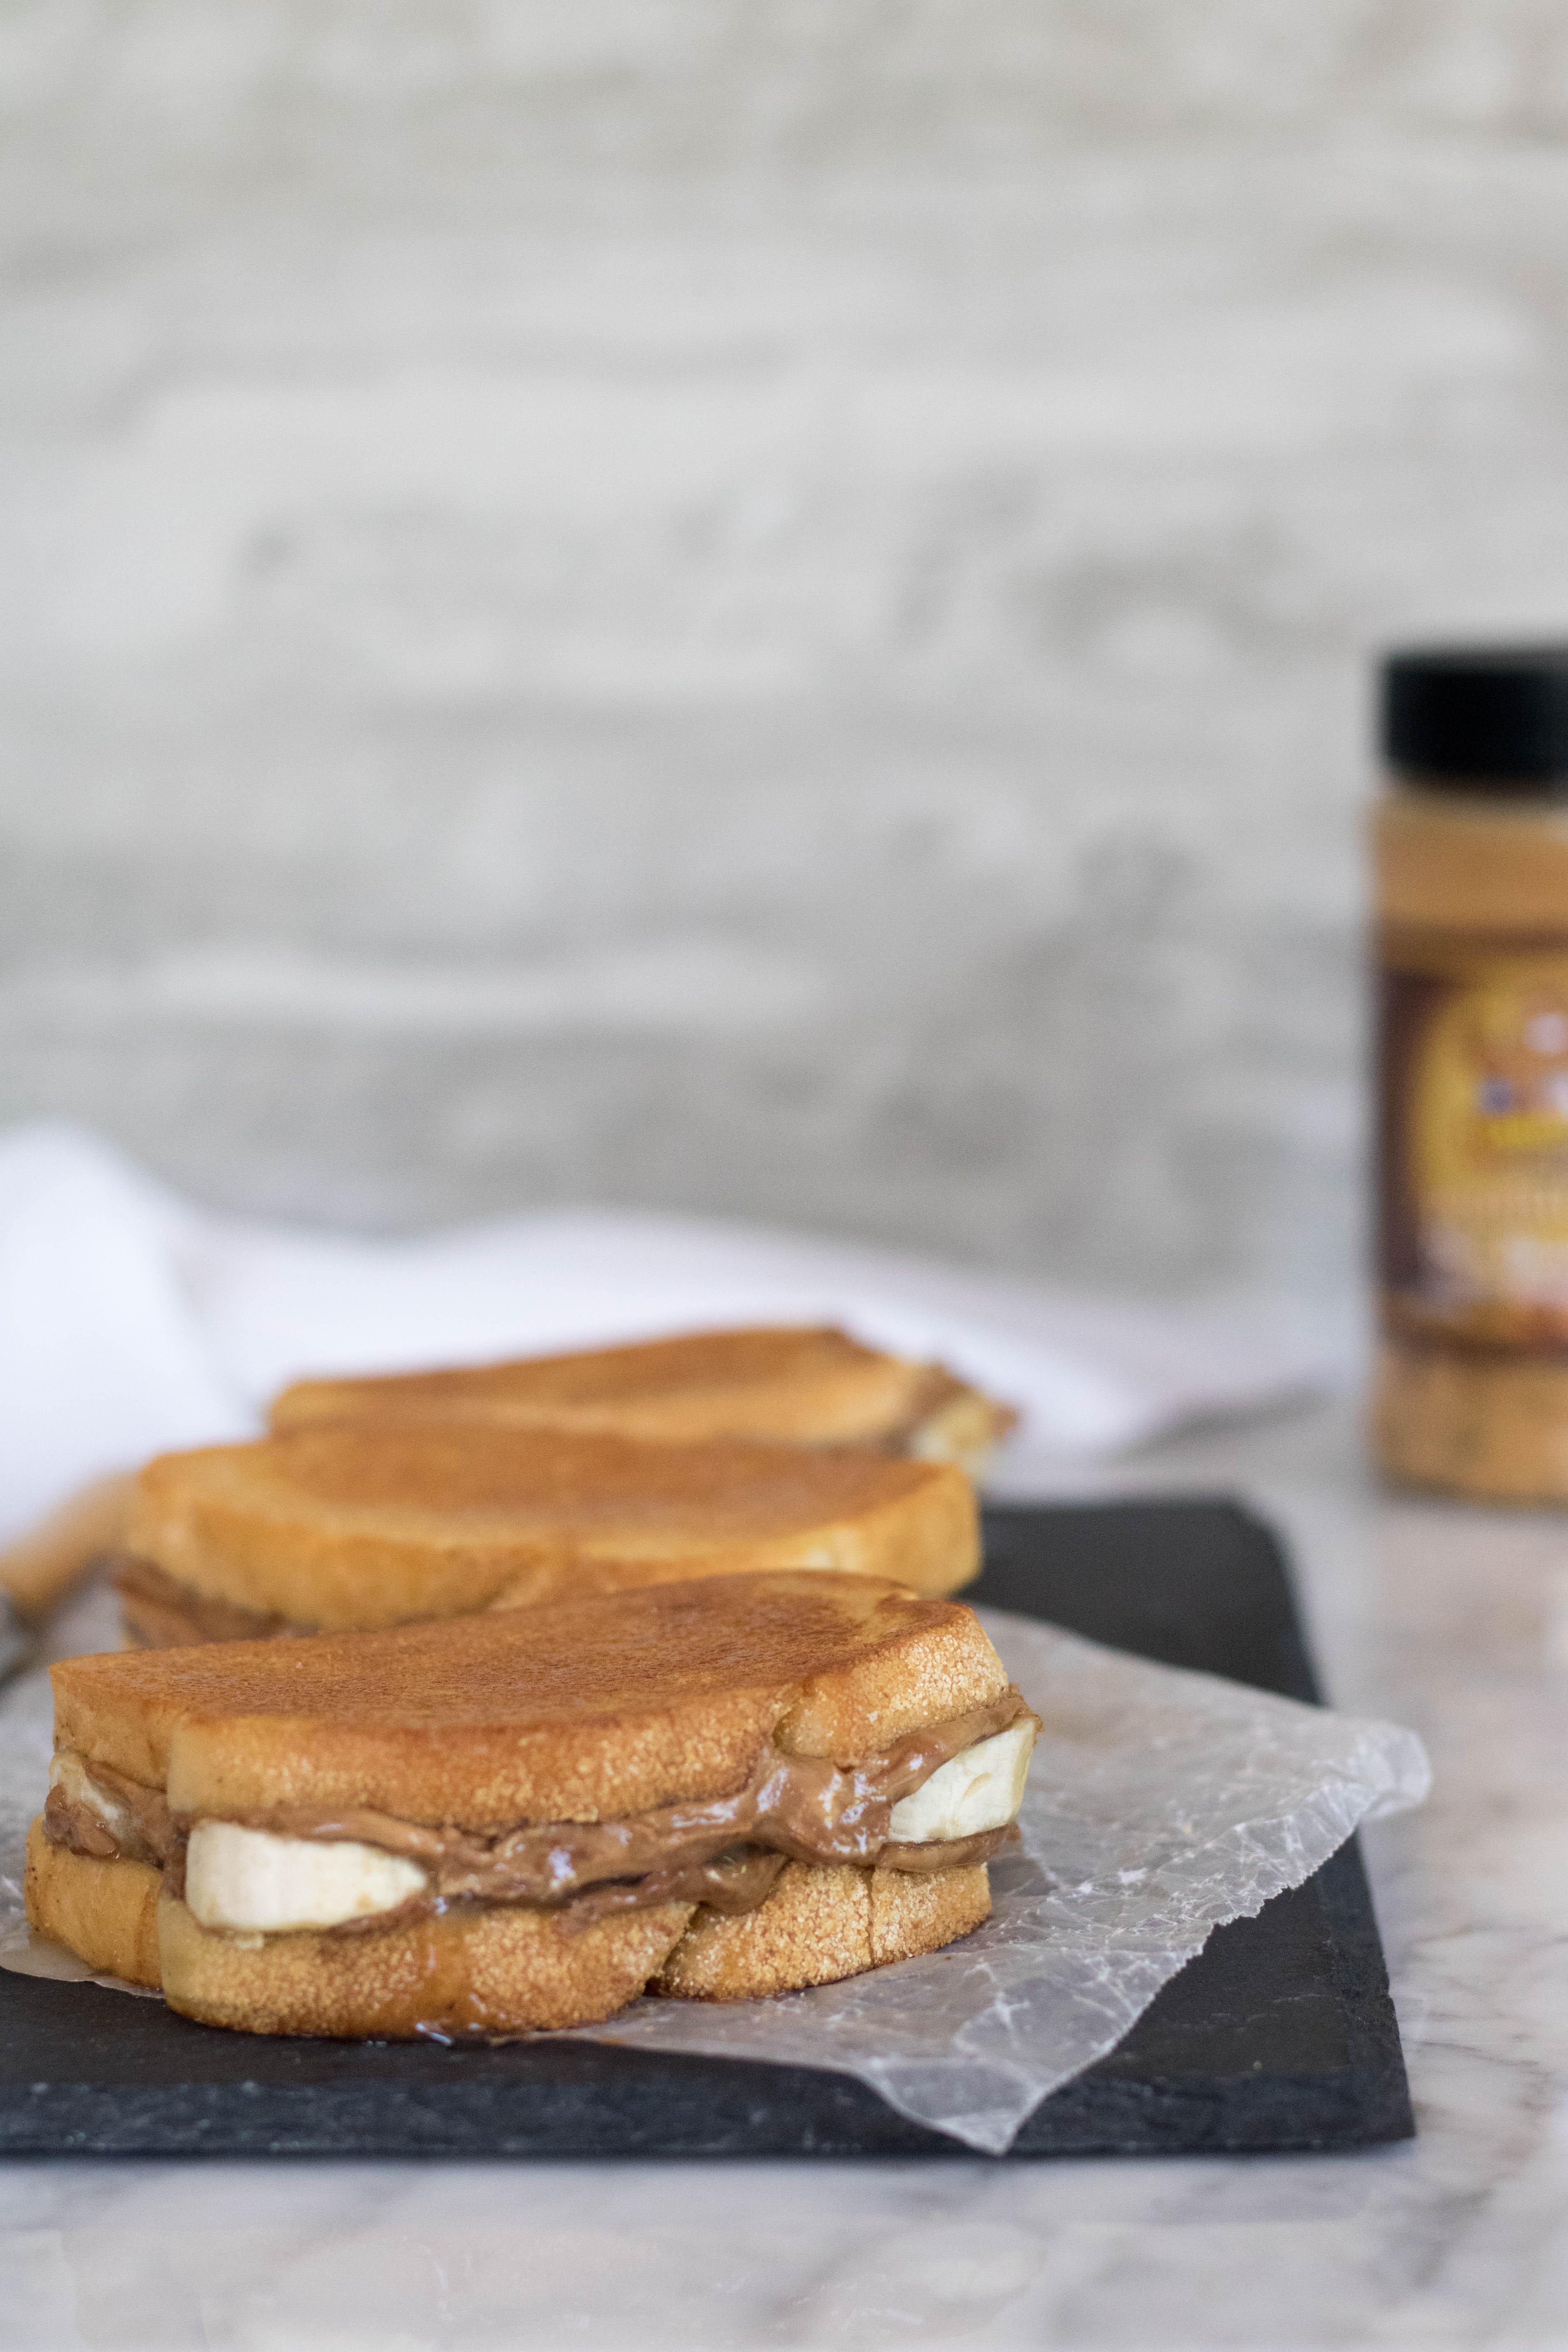 perfect trio of grilled banana sandwiches